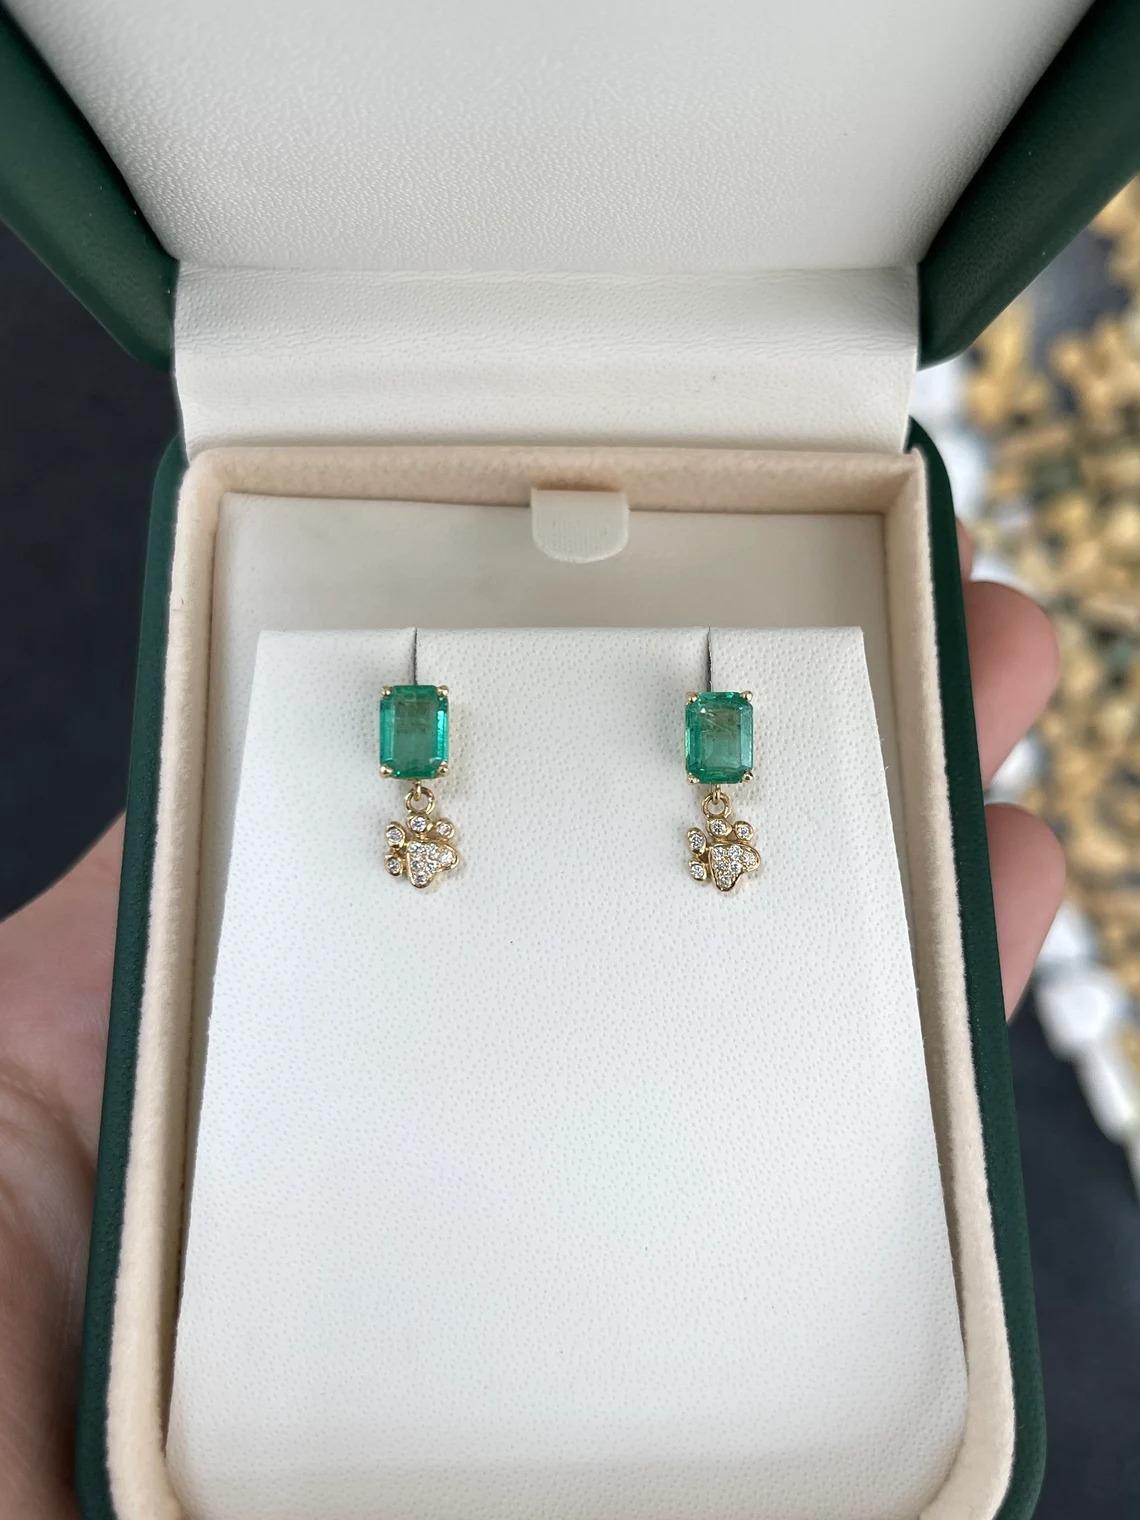 These stunning emerald earring studs boast 2.20 carats of emerald cut emeralds with a captivating lush green color, displaying very good luster and clarity. They are securely set in a four-prong basket, while below, diamond pave cluster paw prints